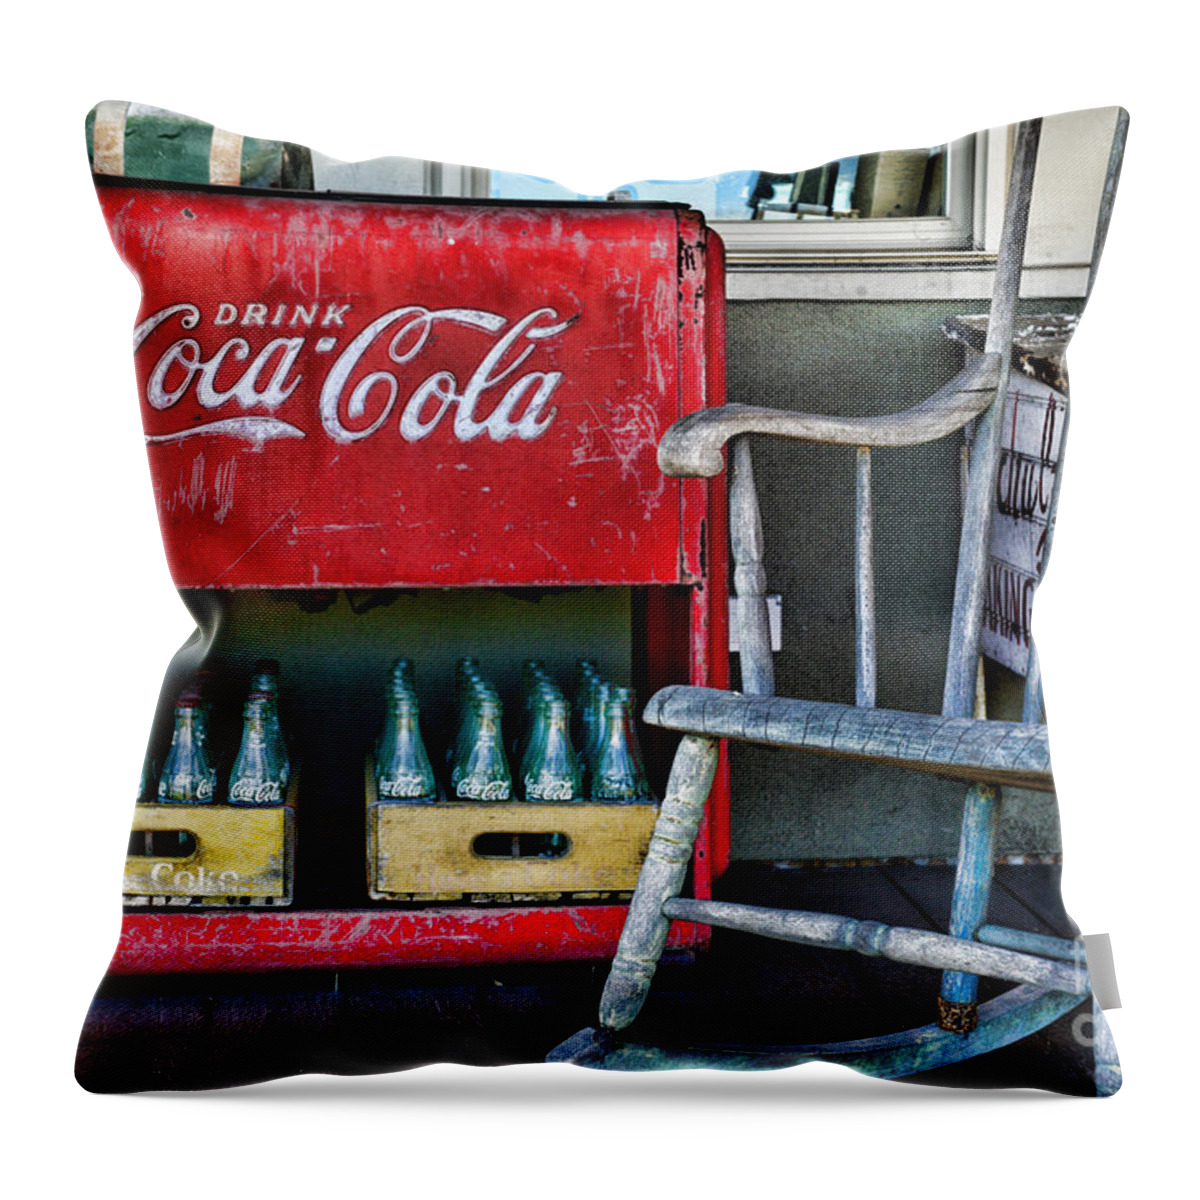 Paul Ward Throw Pillow featuring the photograph Coca Cola Vintage Cooler and Rocking Chair by Paul Ward